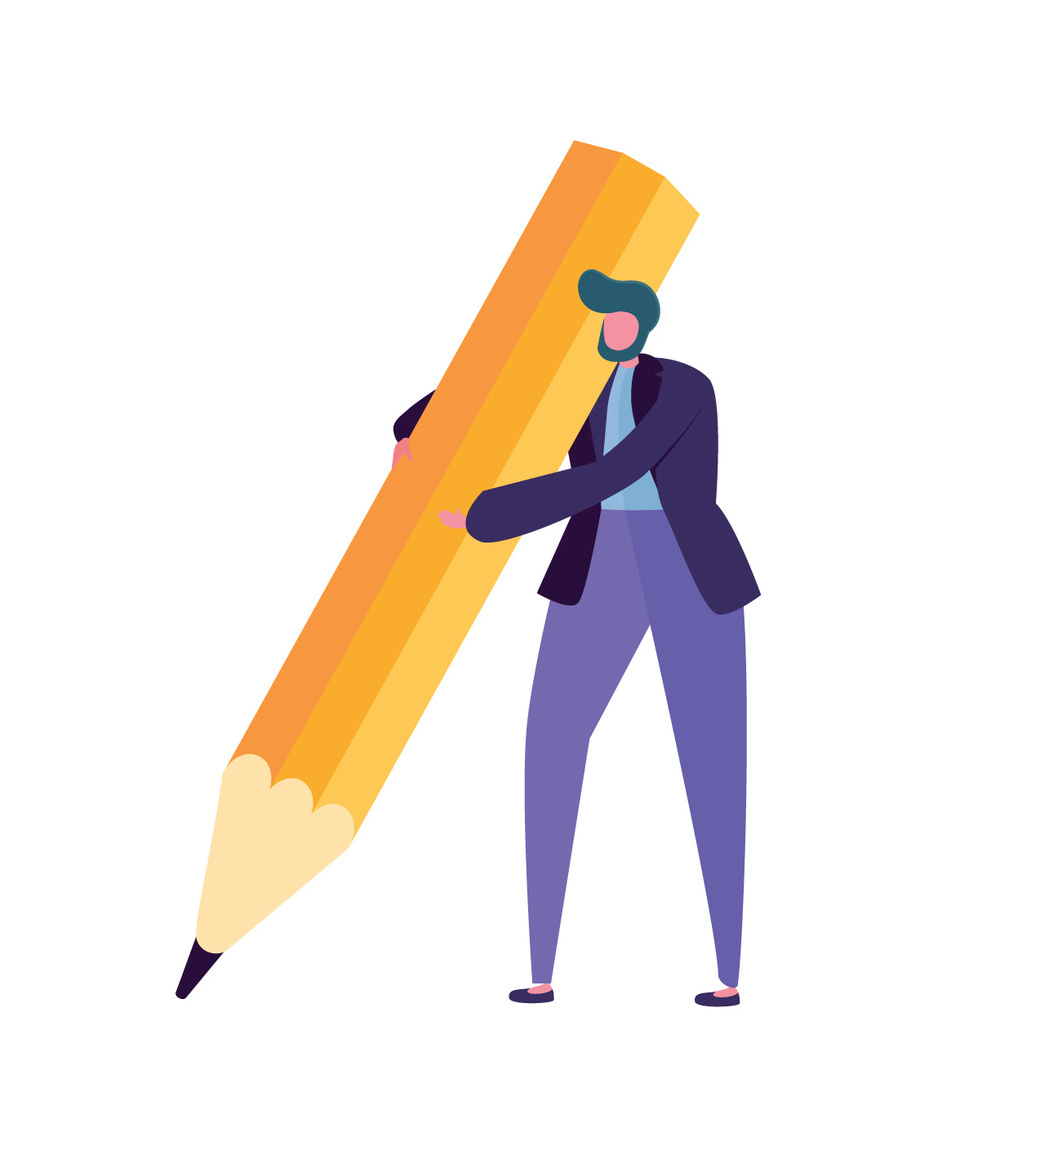 illustration of man with large pencil - copywriting tips